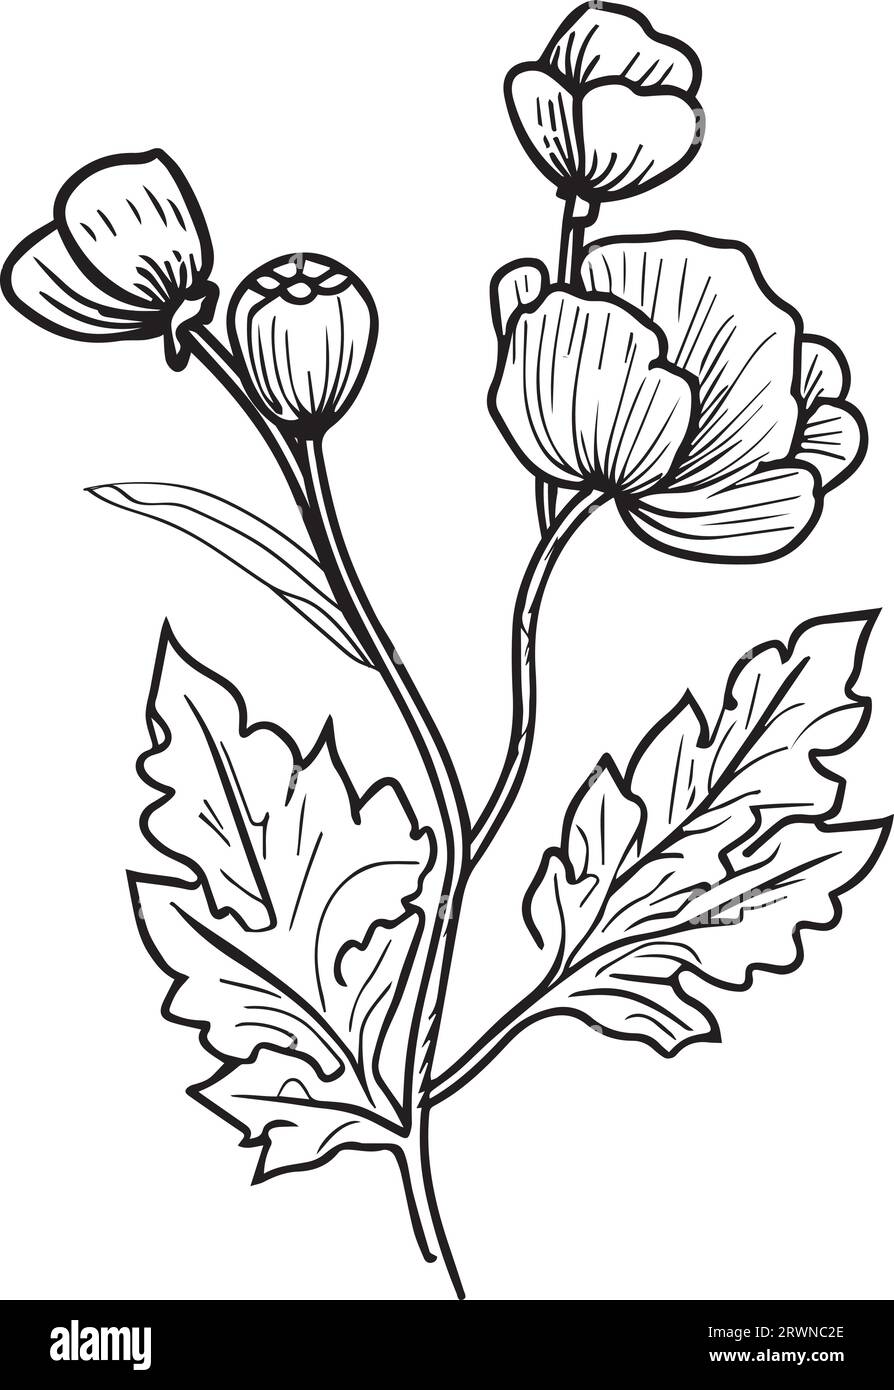 printable poppy flower coloring page, drawing poppy flower coloring ...